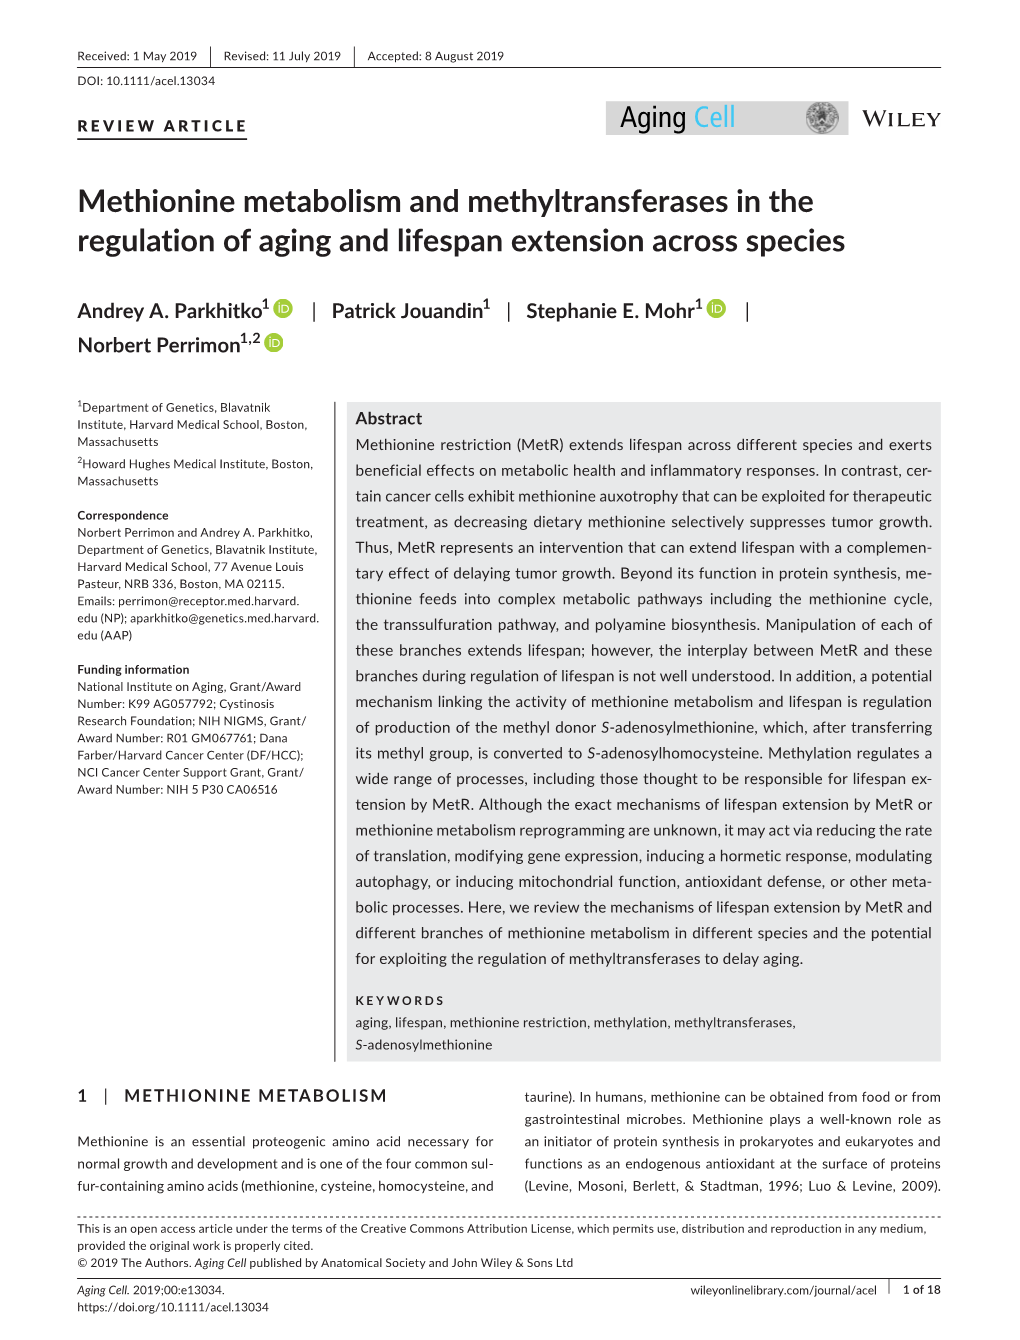 Methionine Metabolism and Methyltransferases in the Regulation of Aging and Lifespan Extension Across Species